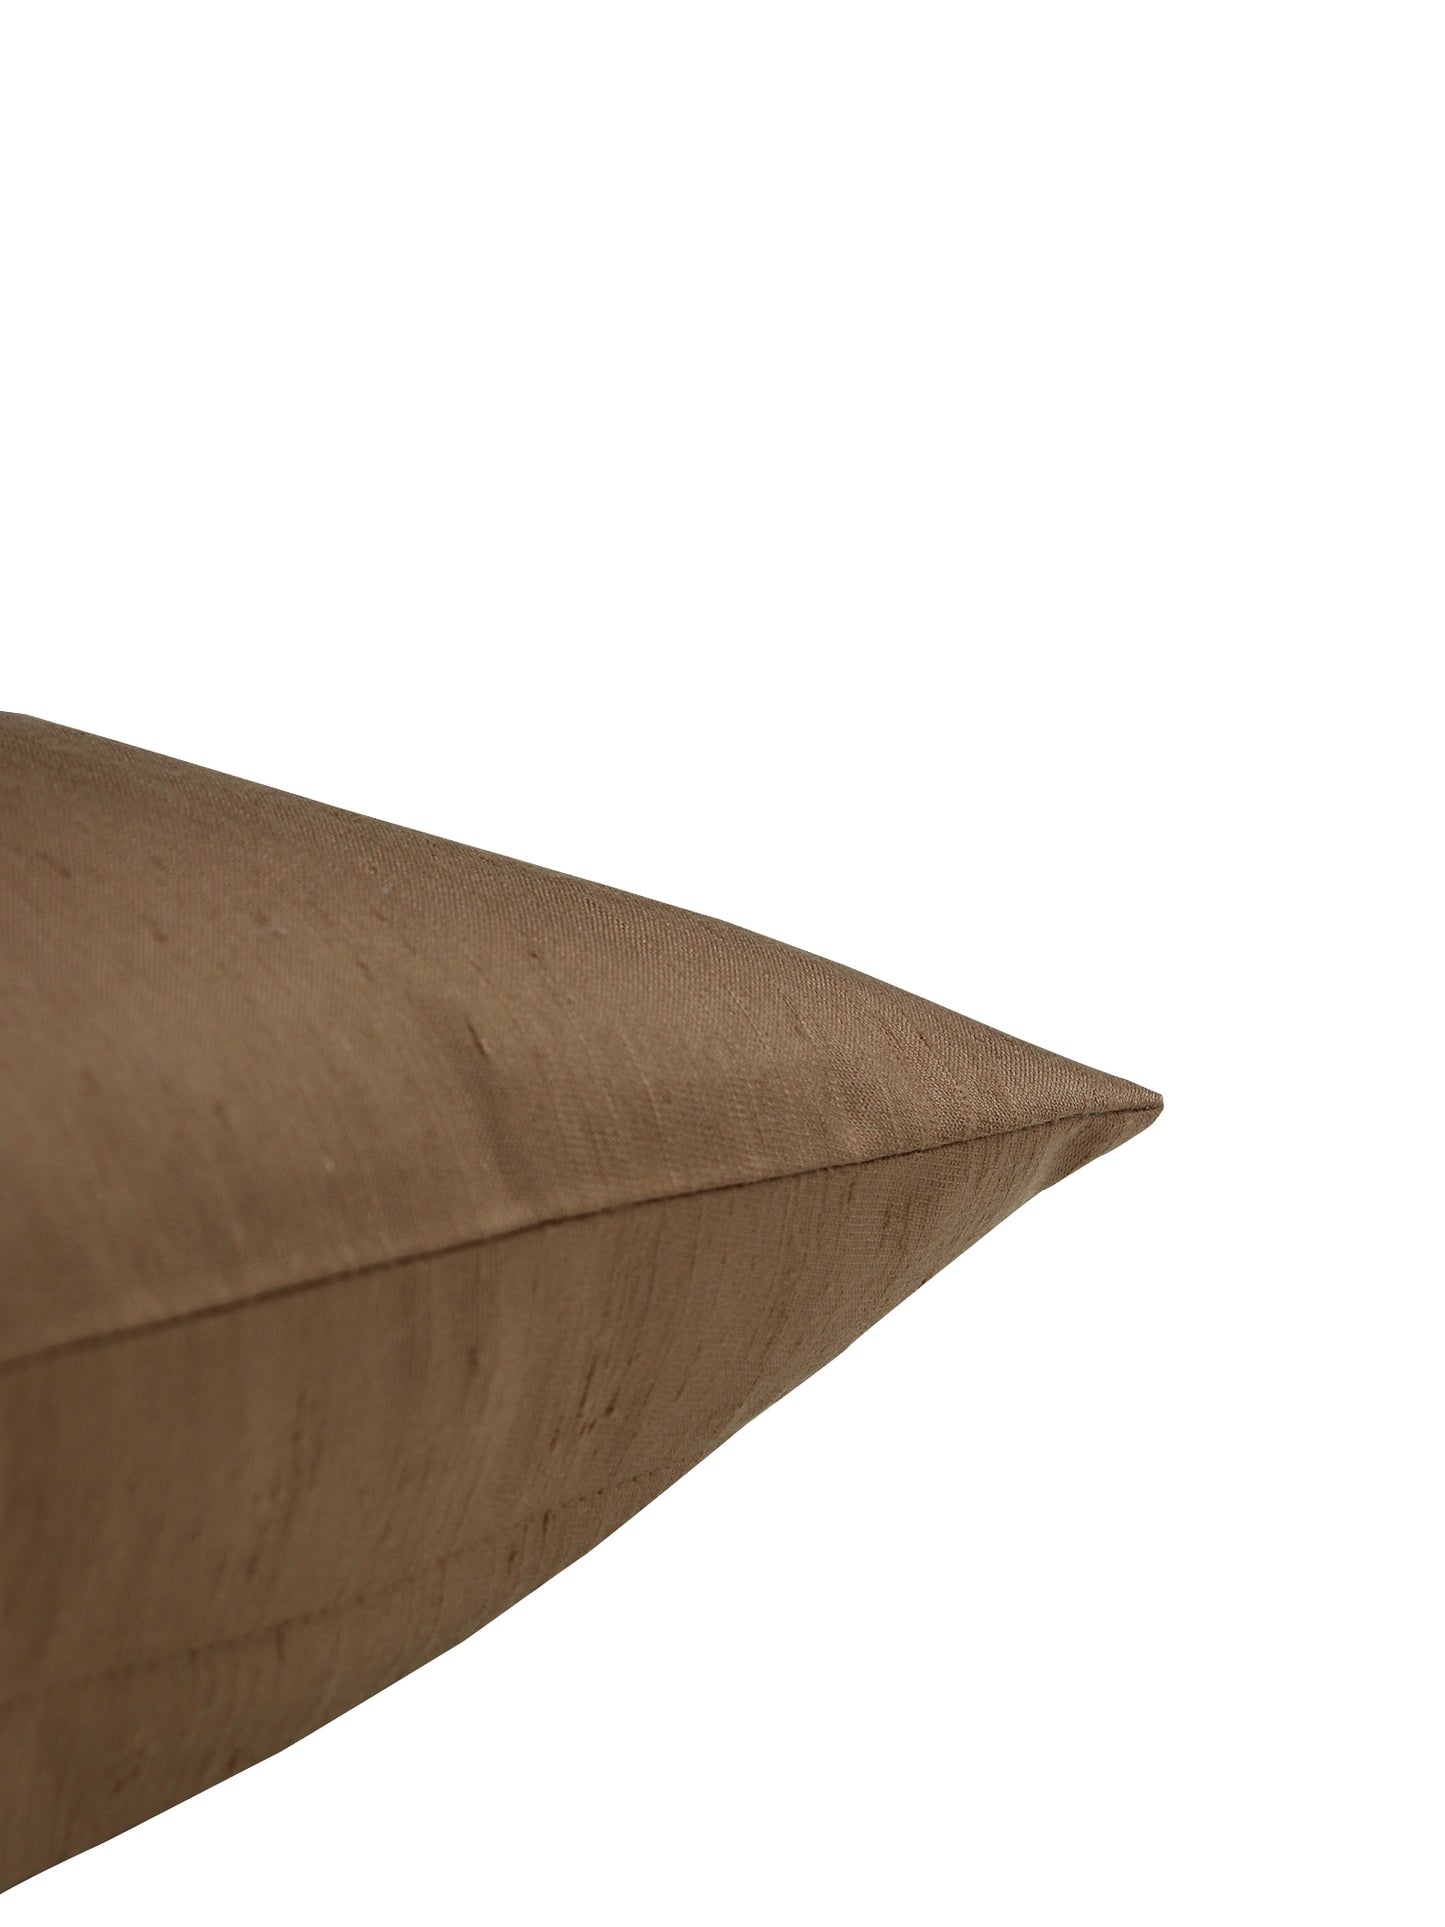 Cushion Cover Cotton Blend Solid Light Brown - 16" X 16"